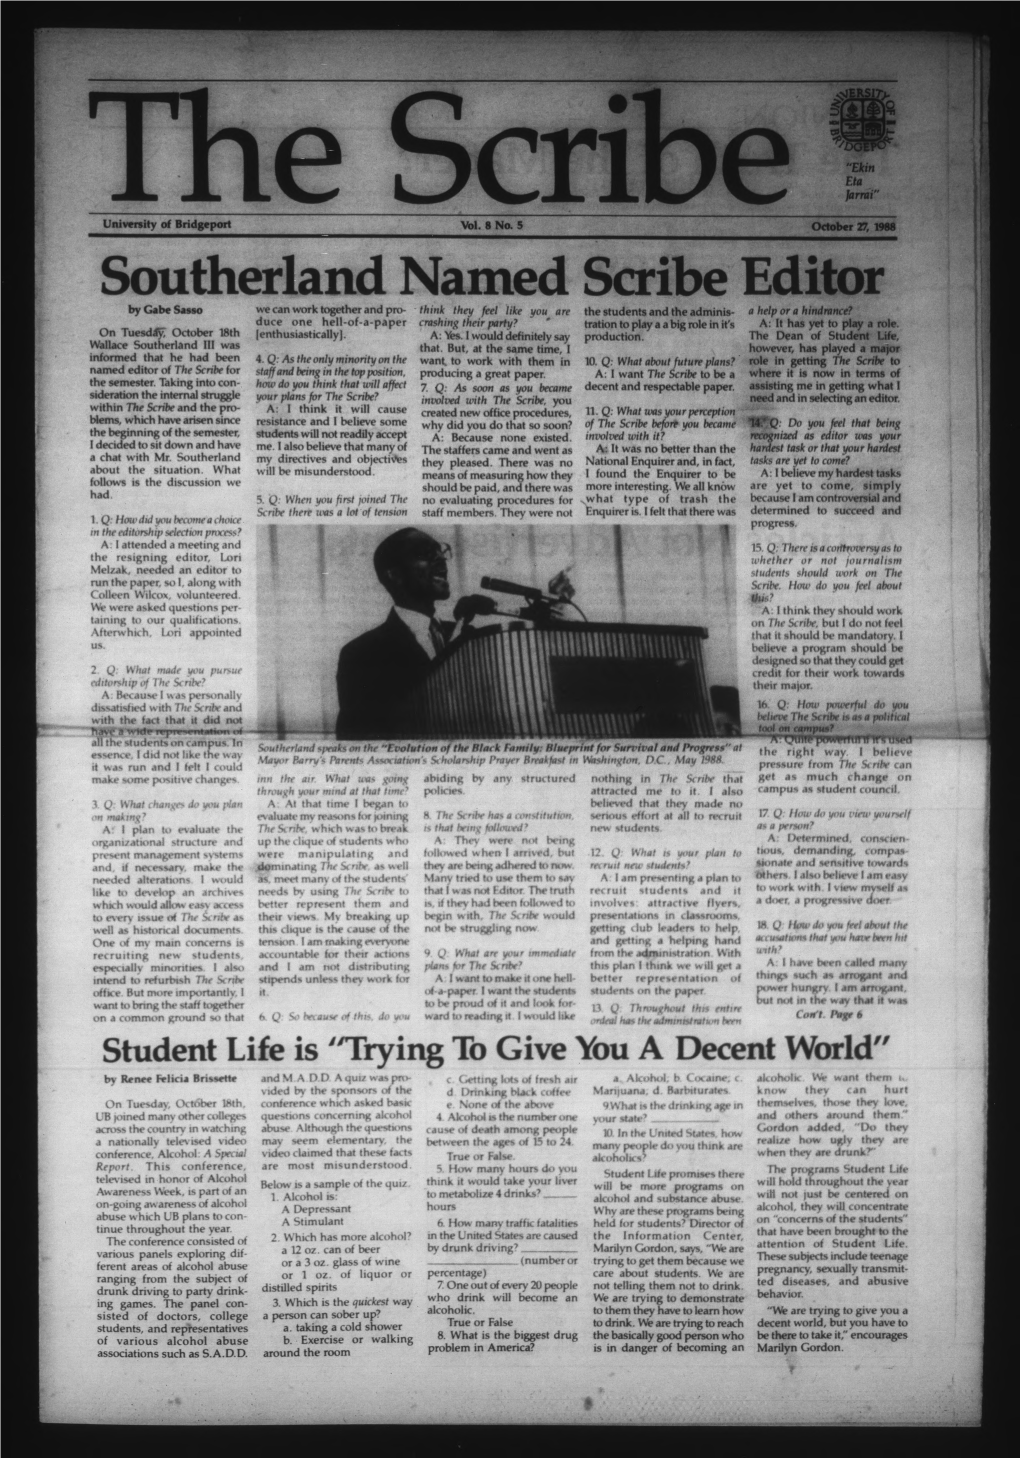 Southerland Named Scribe Editor